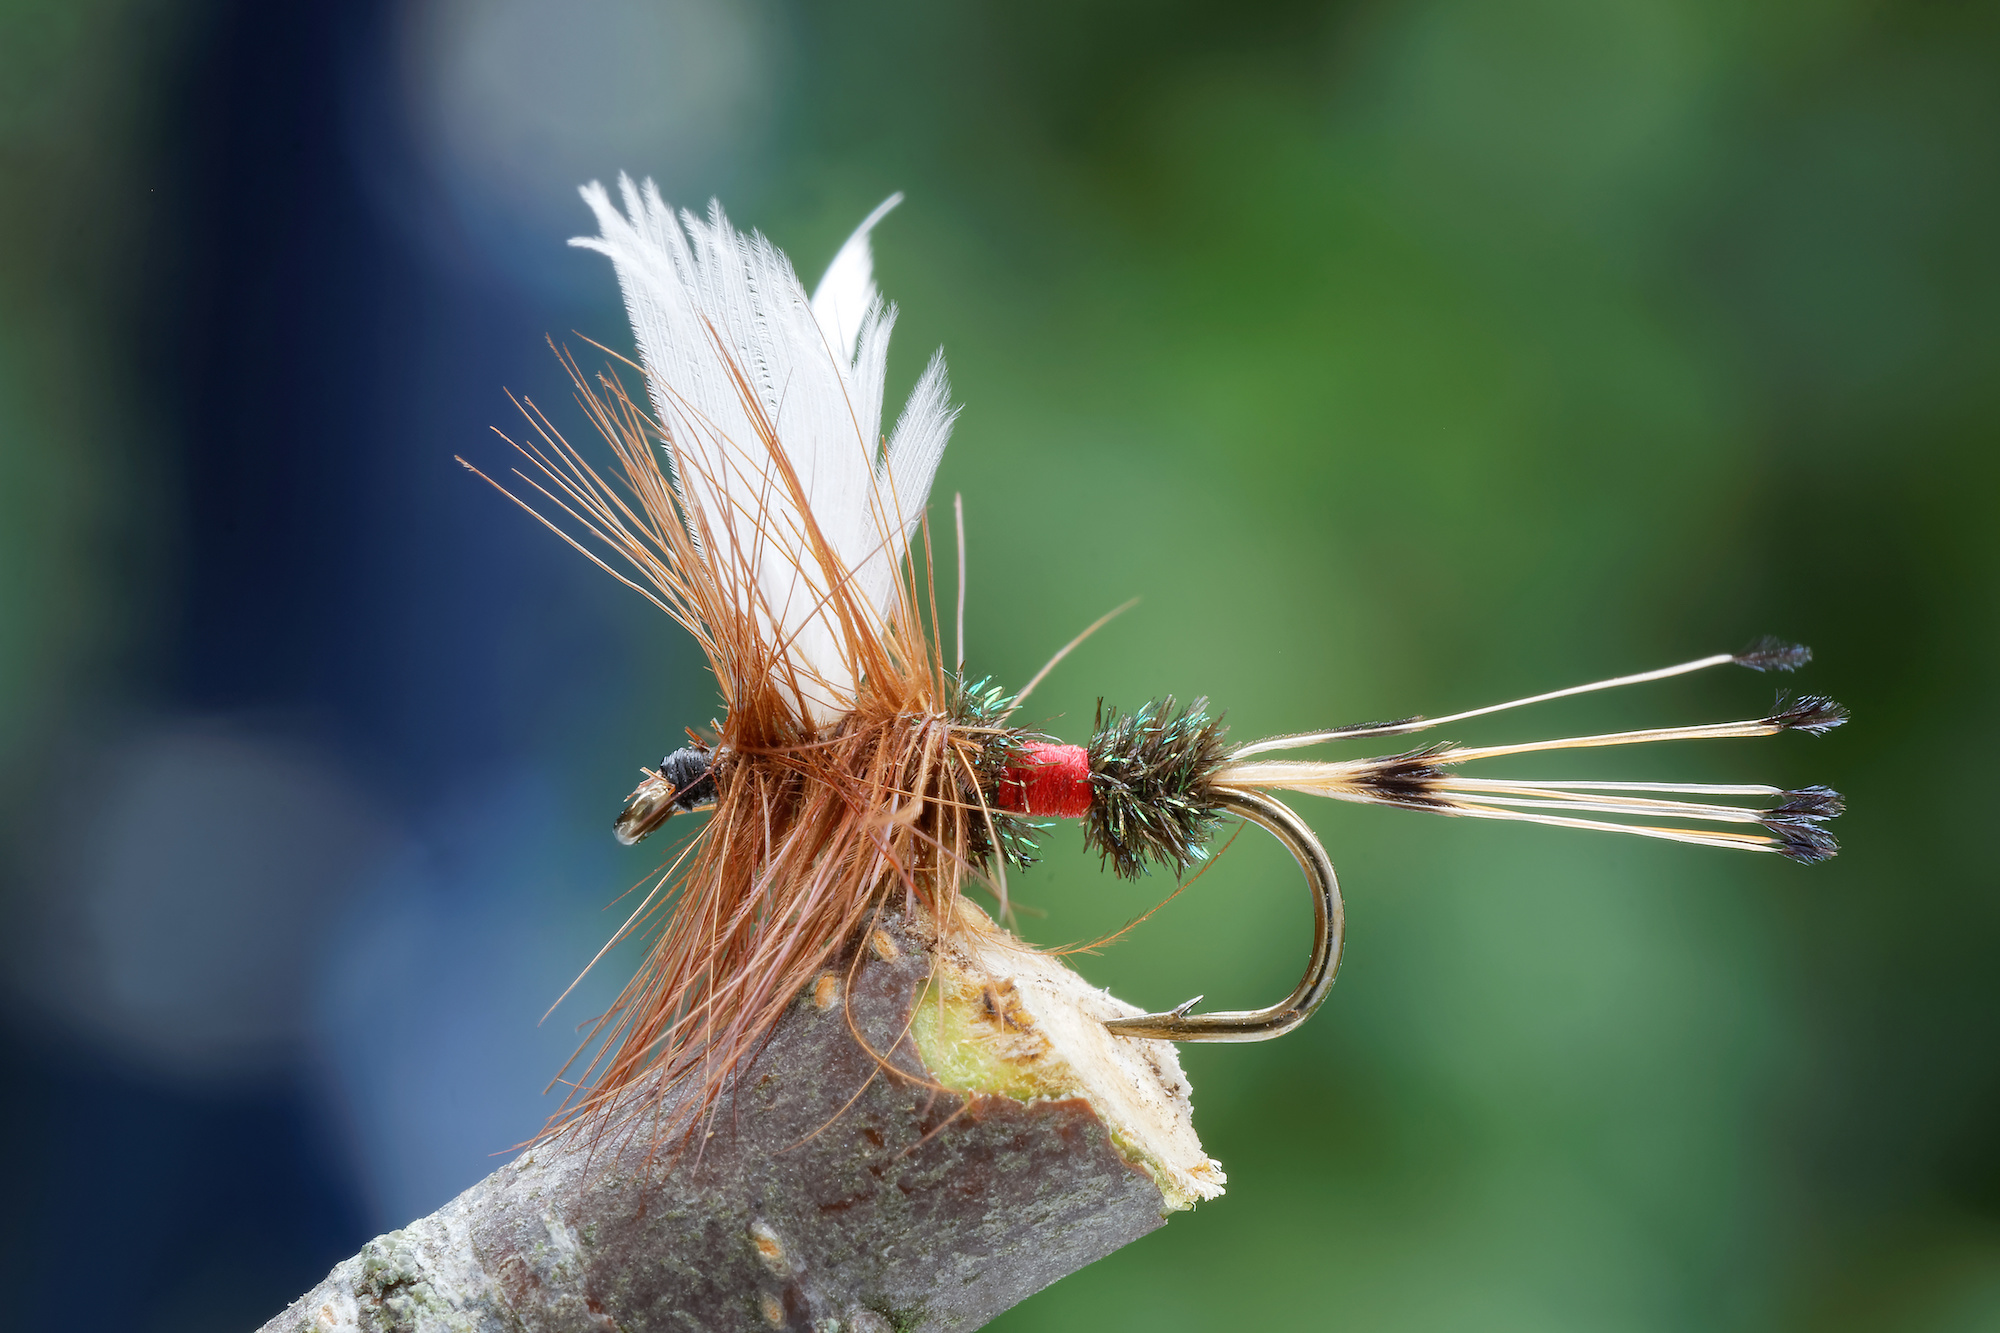  Fly Fishing Flies - 14 / Fly Fishing Flies / Fly Fishing  Equipment: Sports & Outdoors